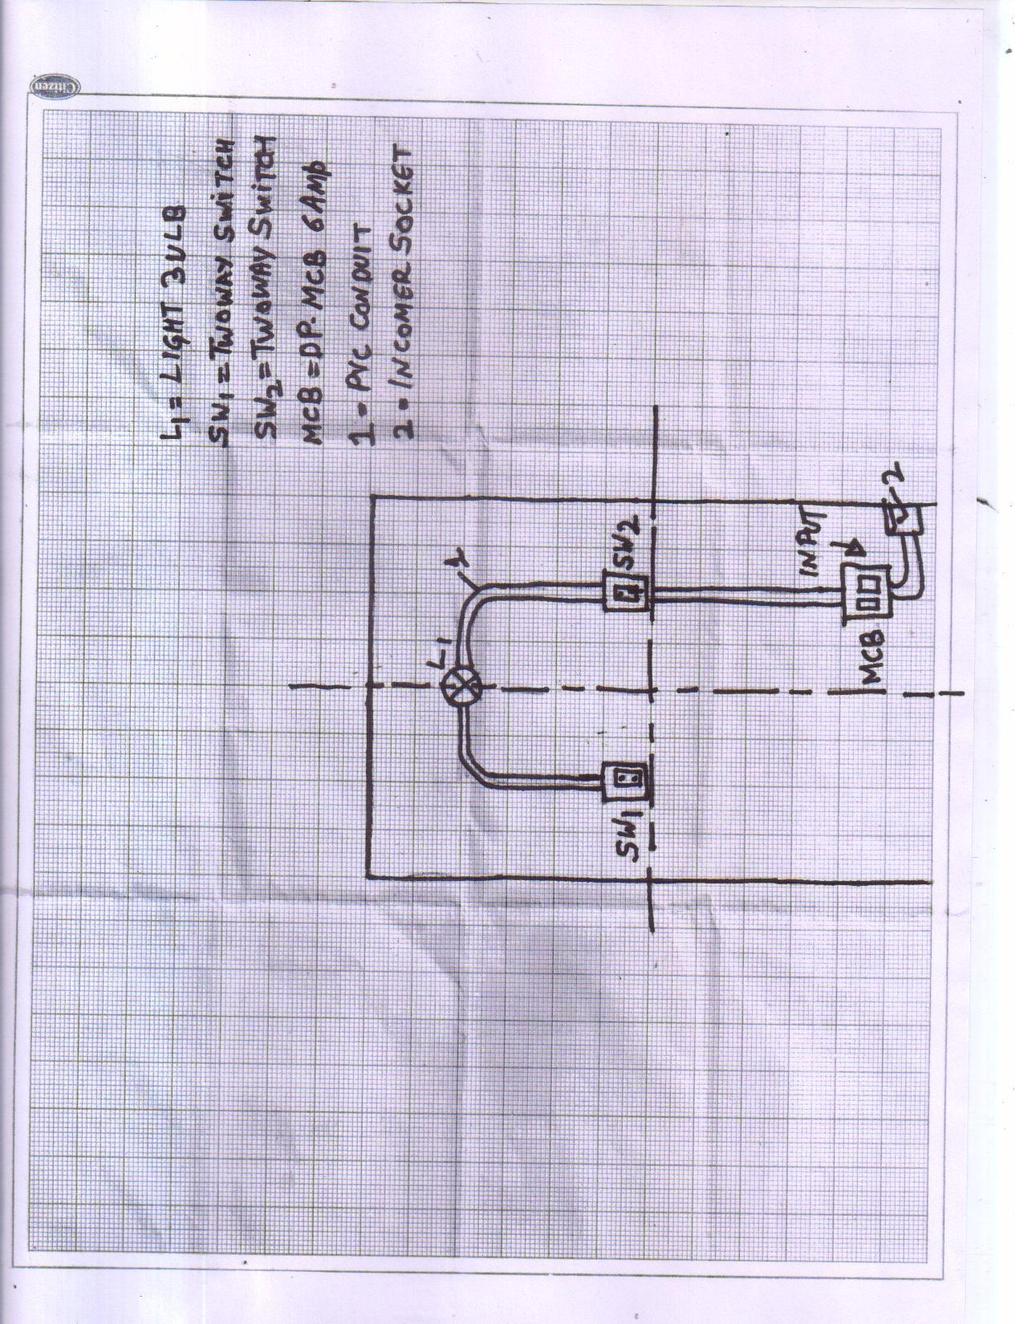 Electrical Drawing Version 1 Dec